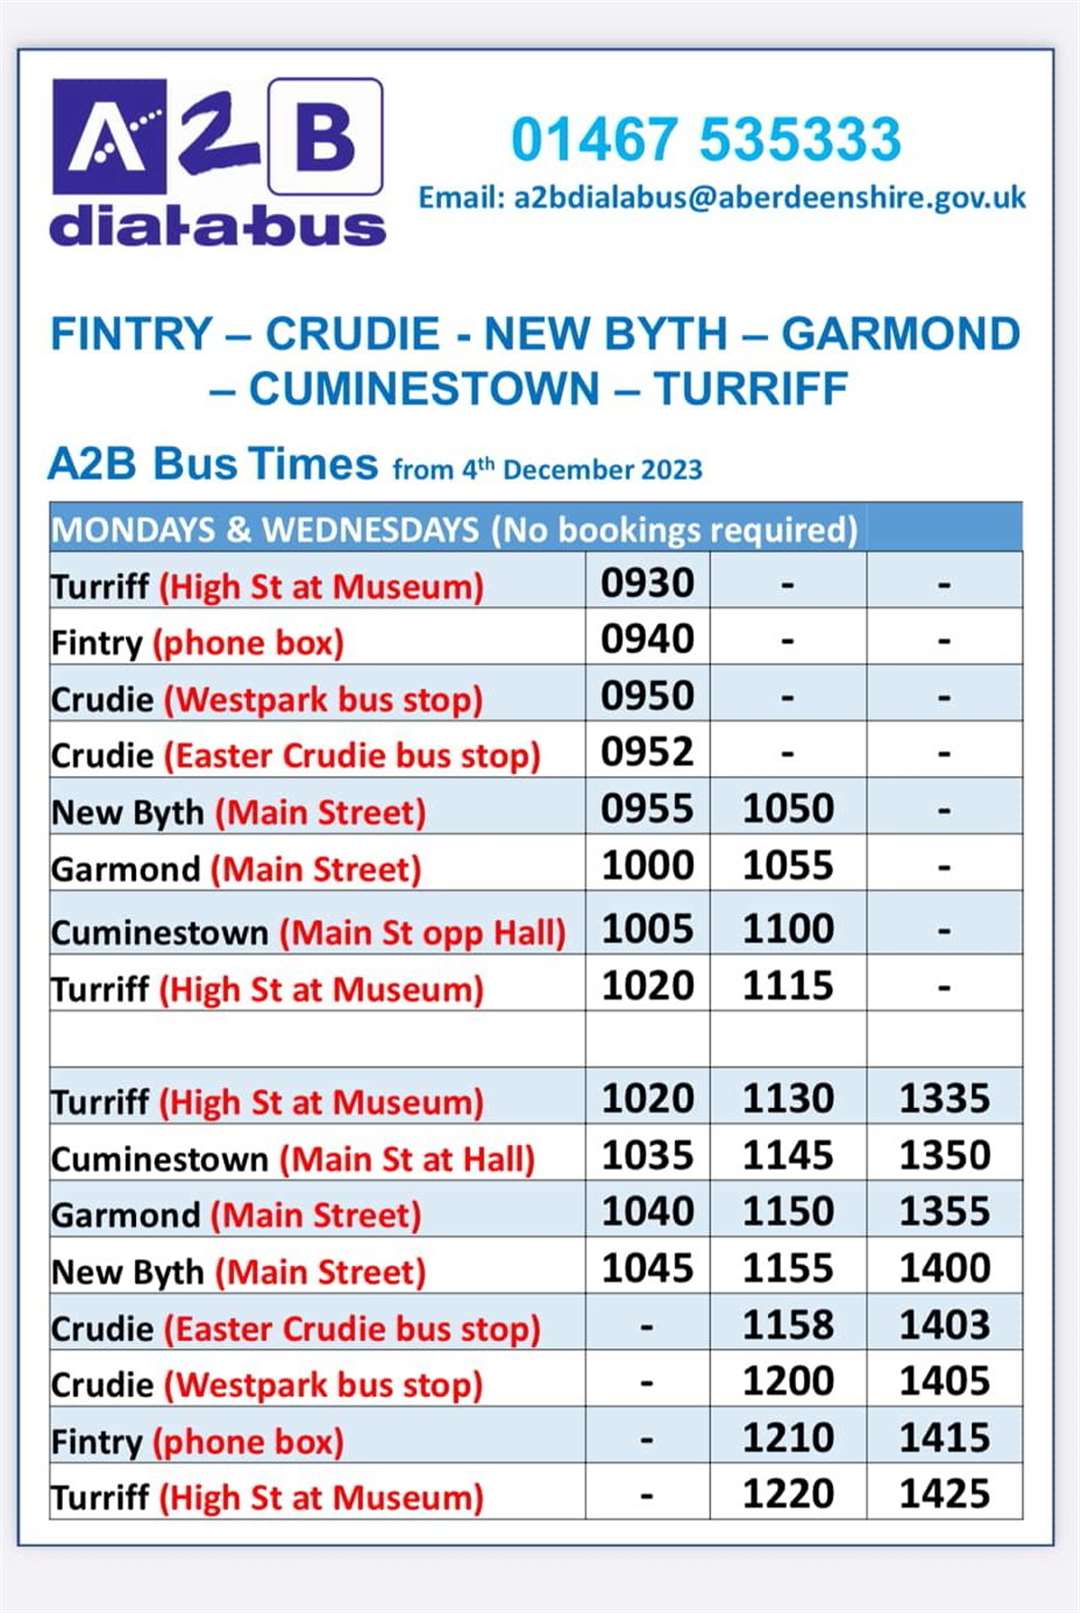 The new timetable